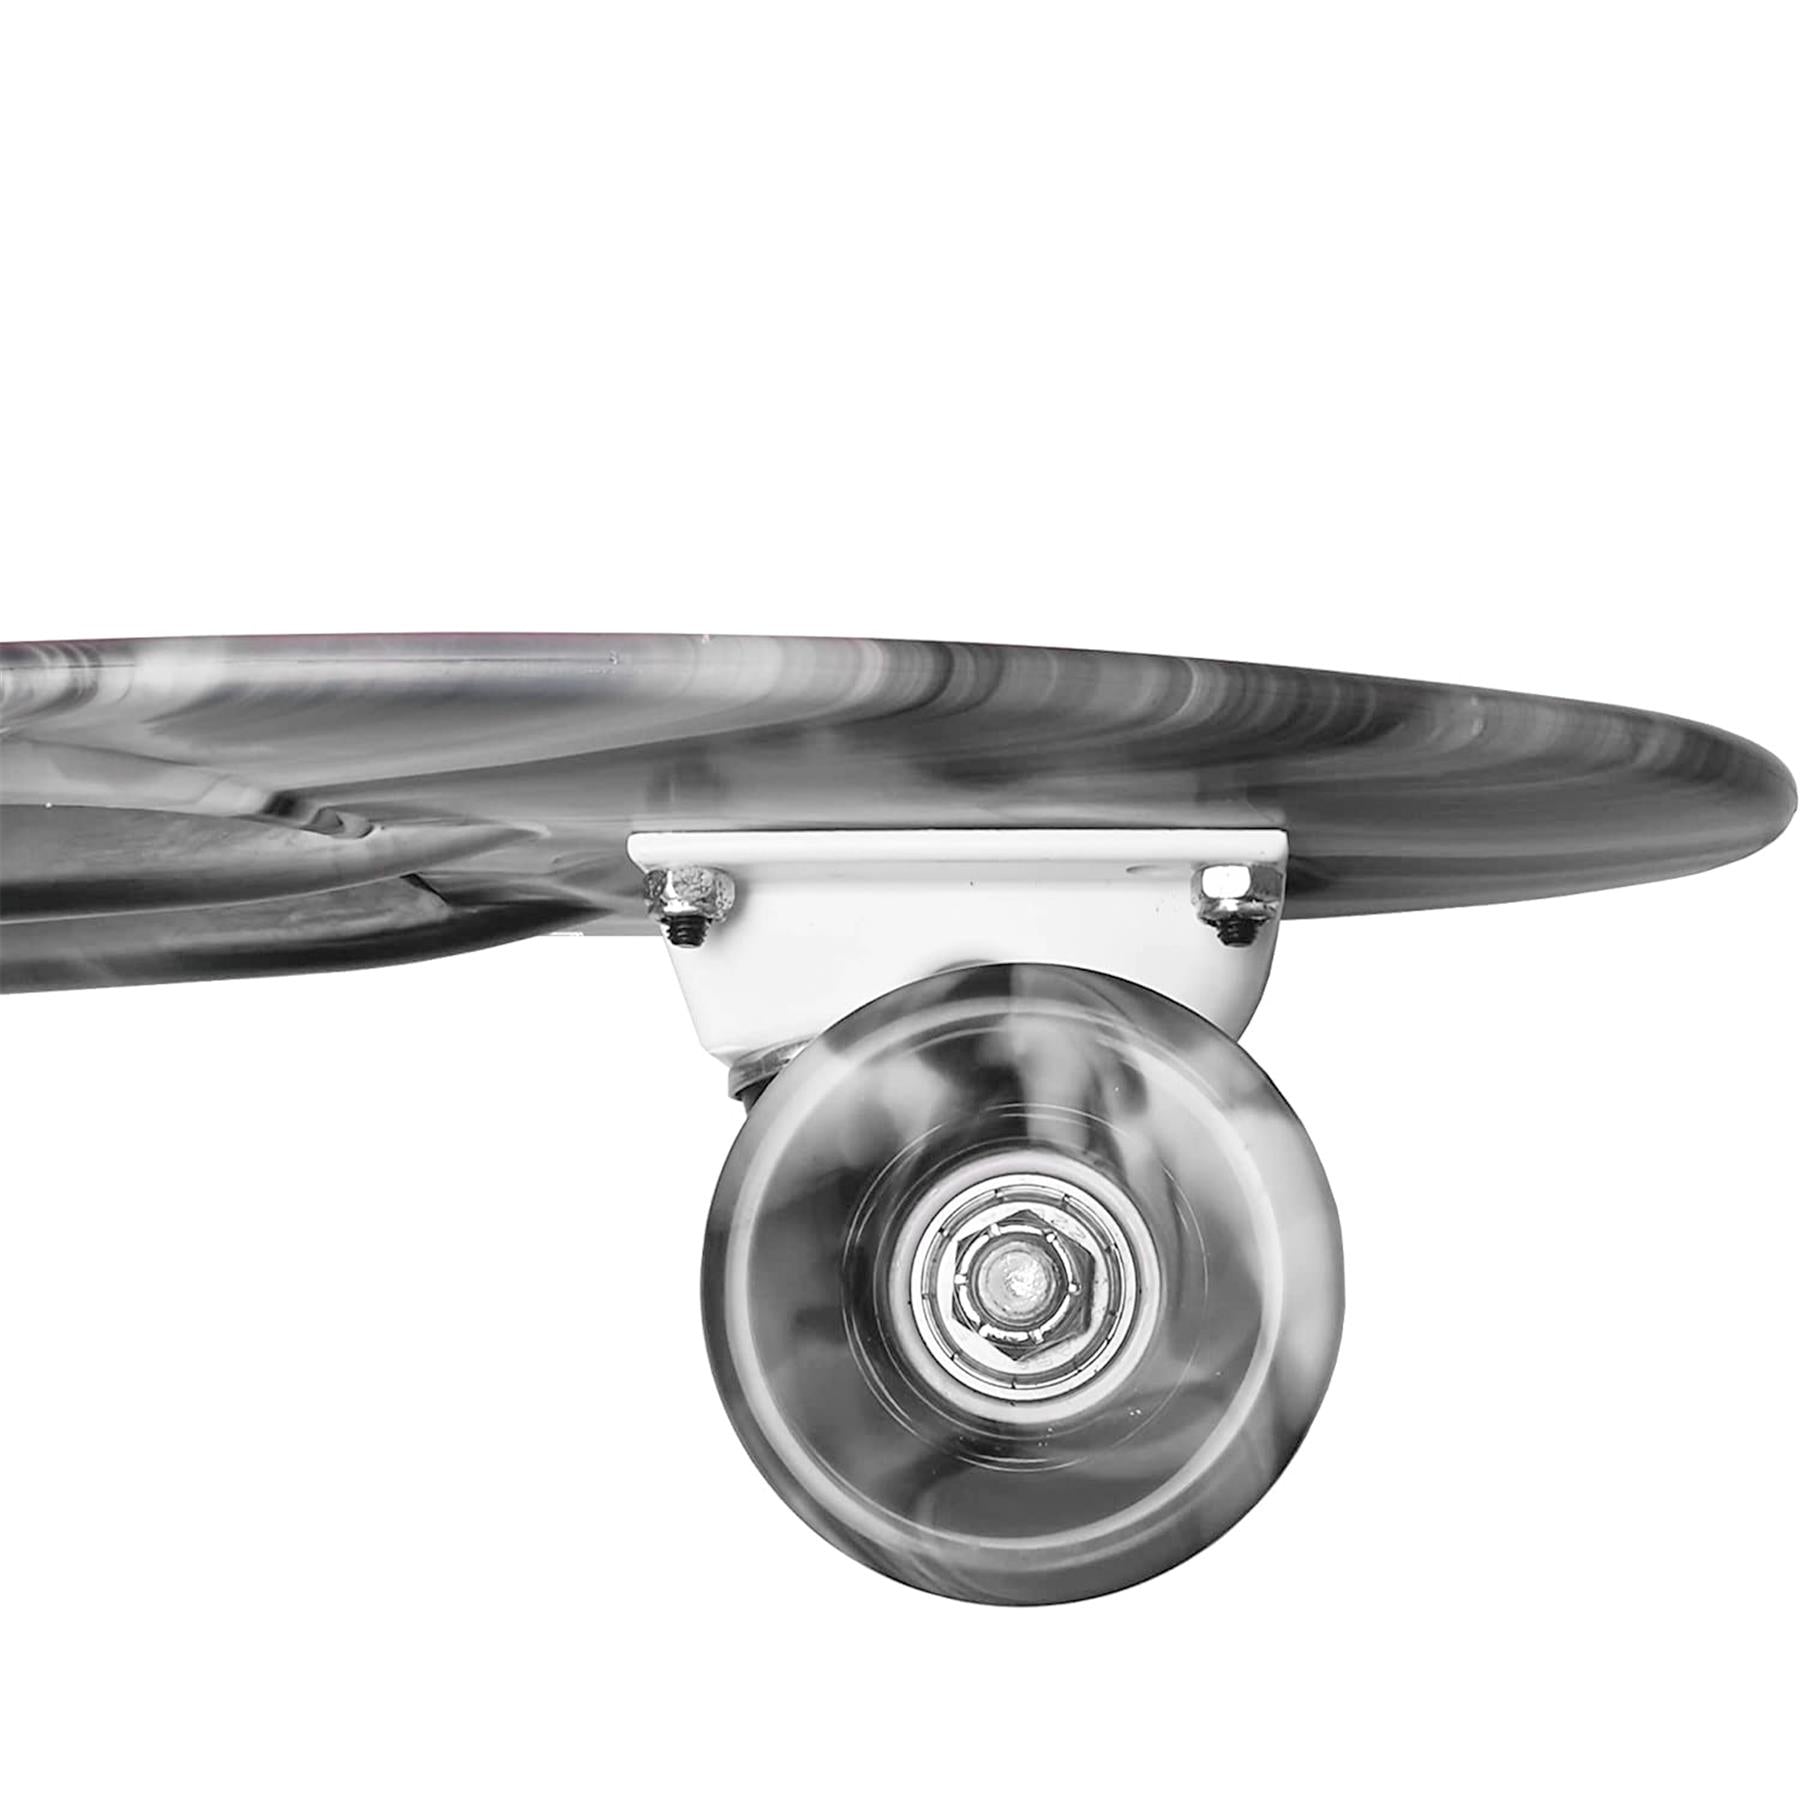 Retro Skateboard Black by The Magic Toy Shop - The Magic Toy Shop